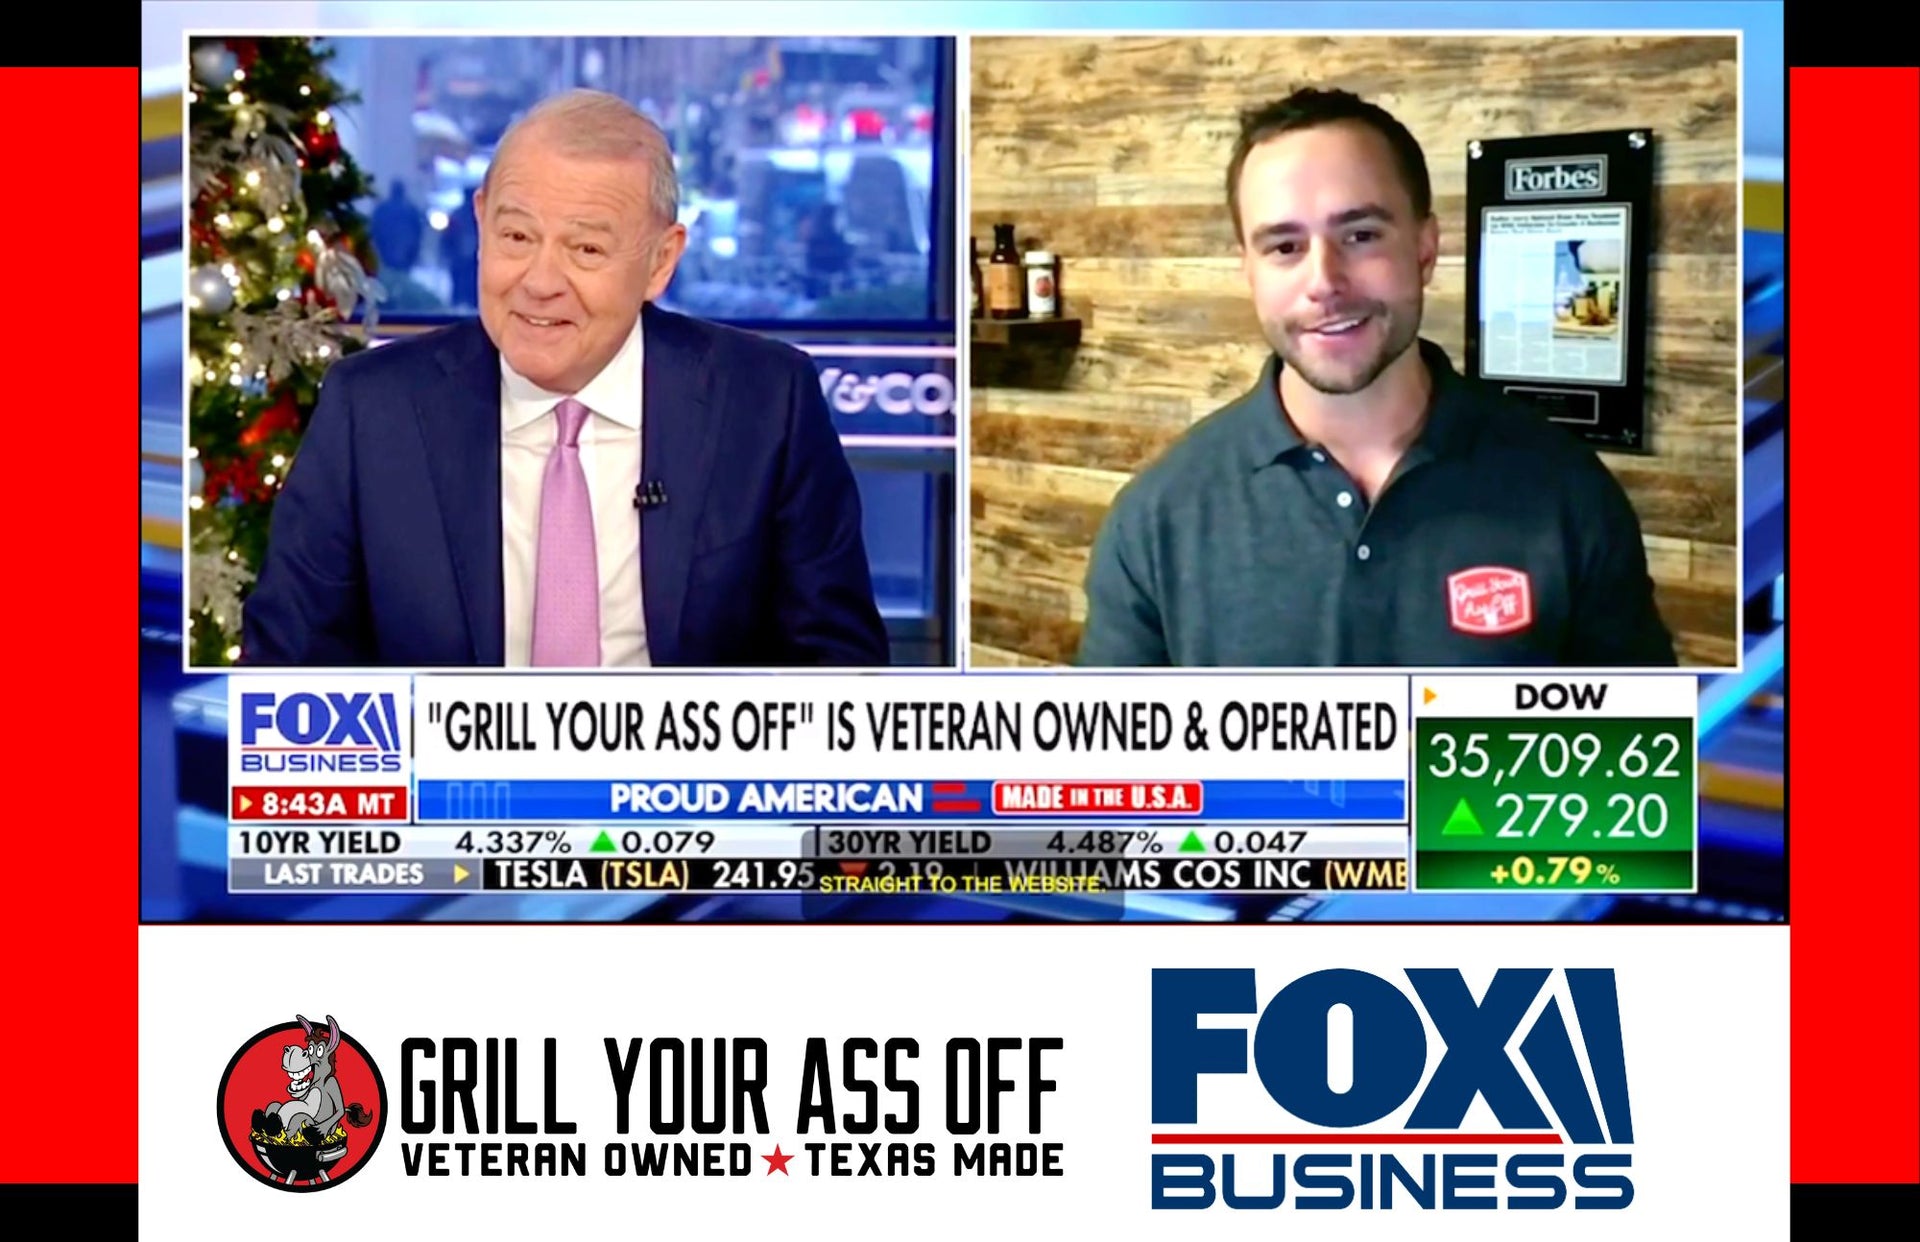 FOX Business Network,fox news,Stuart Varney,Varney and Co News,FBN,Fox business,Sailor Jerry,Independence Fund,Veteran Community,Veteran Owned Business